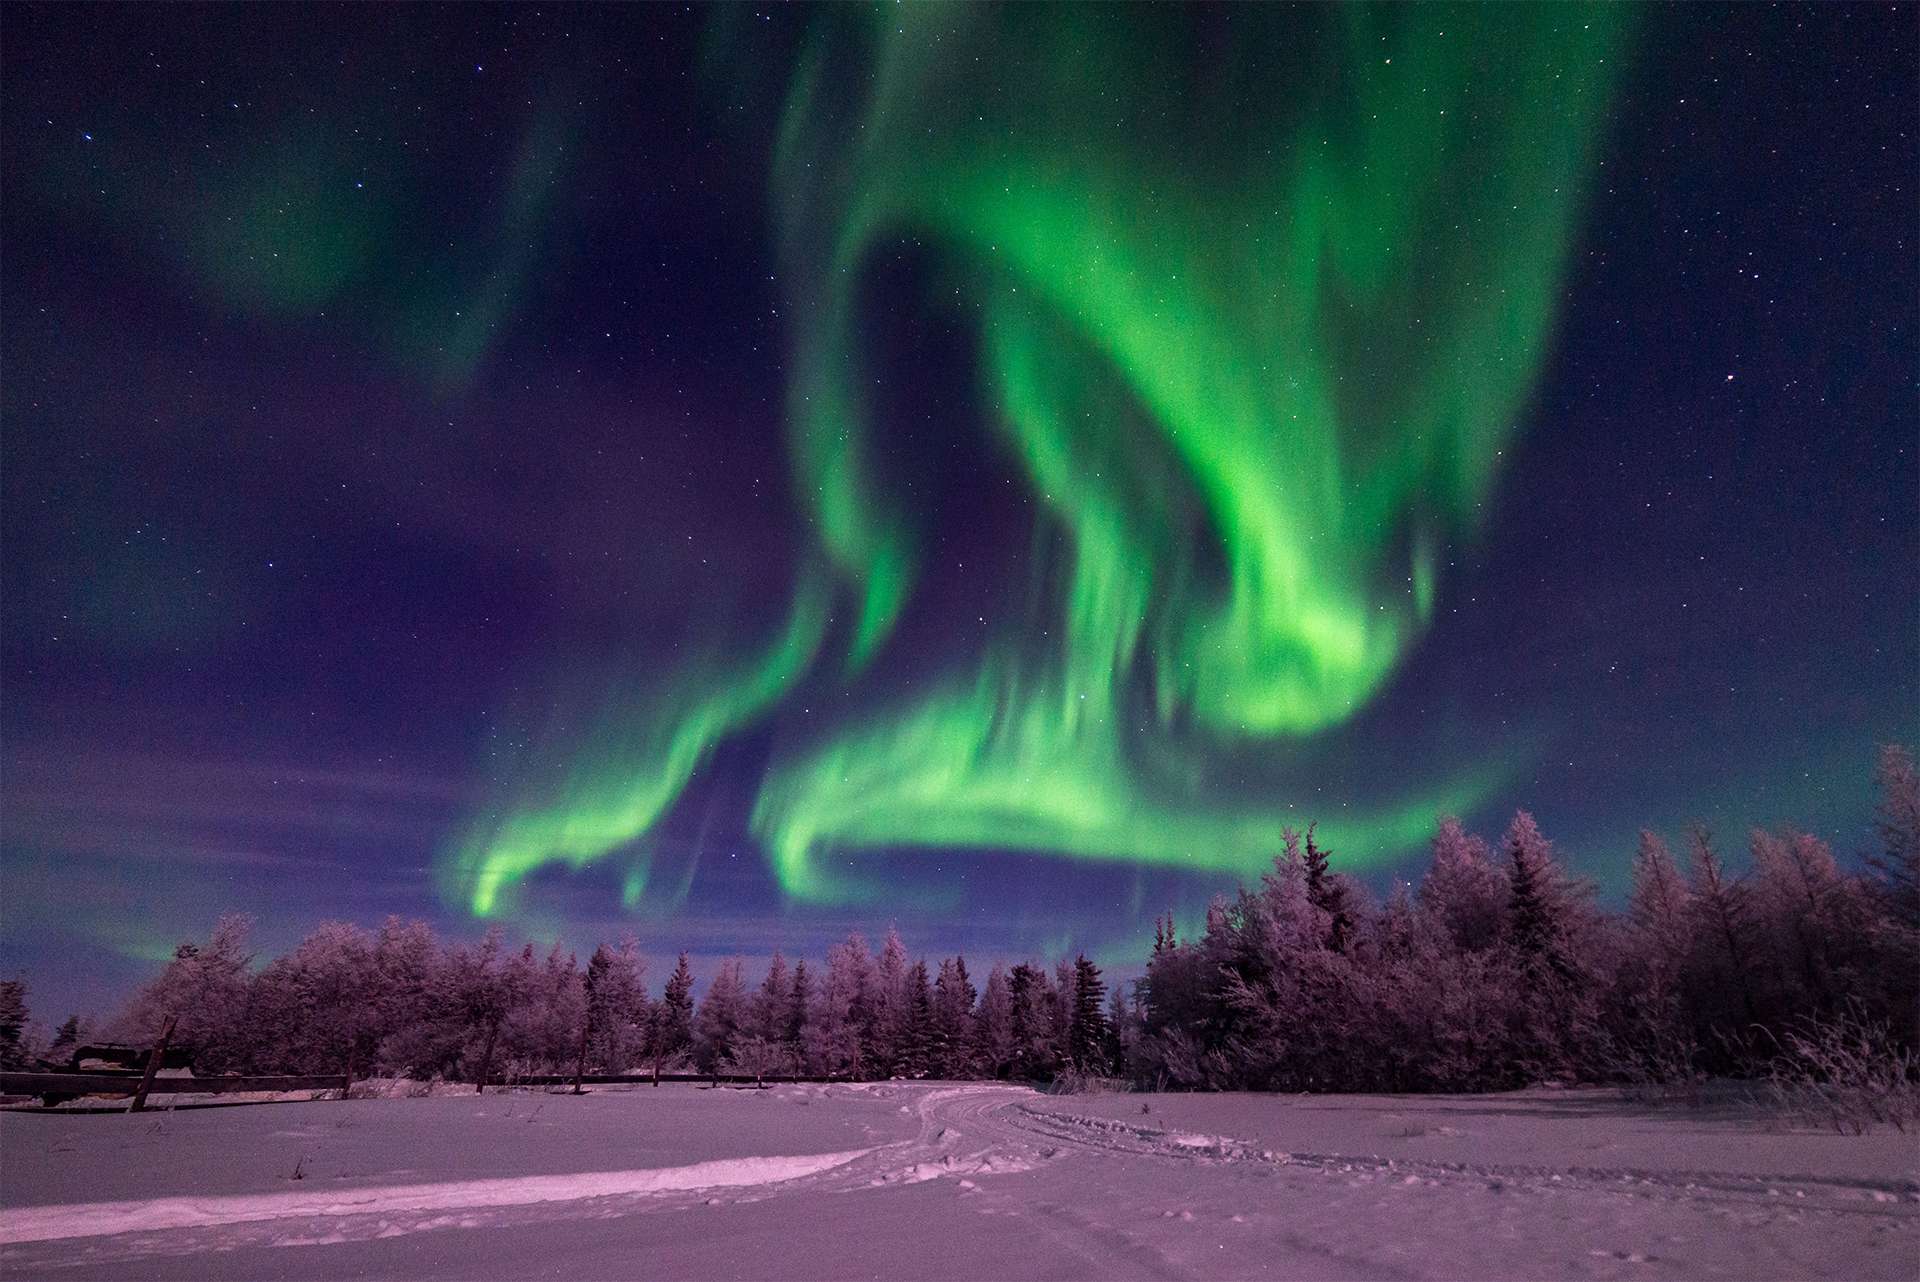 Northern lights display vibrant greens in dark blue sky over freshly fallen snow and snow-covered trees